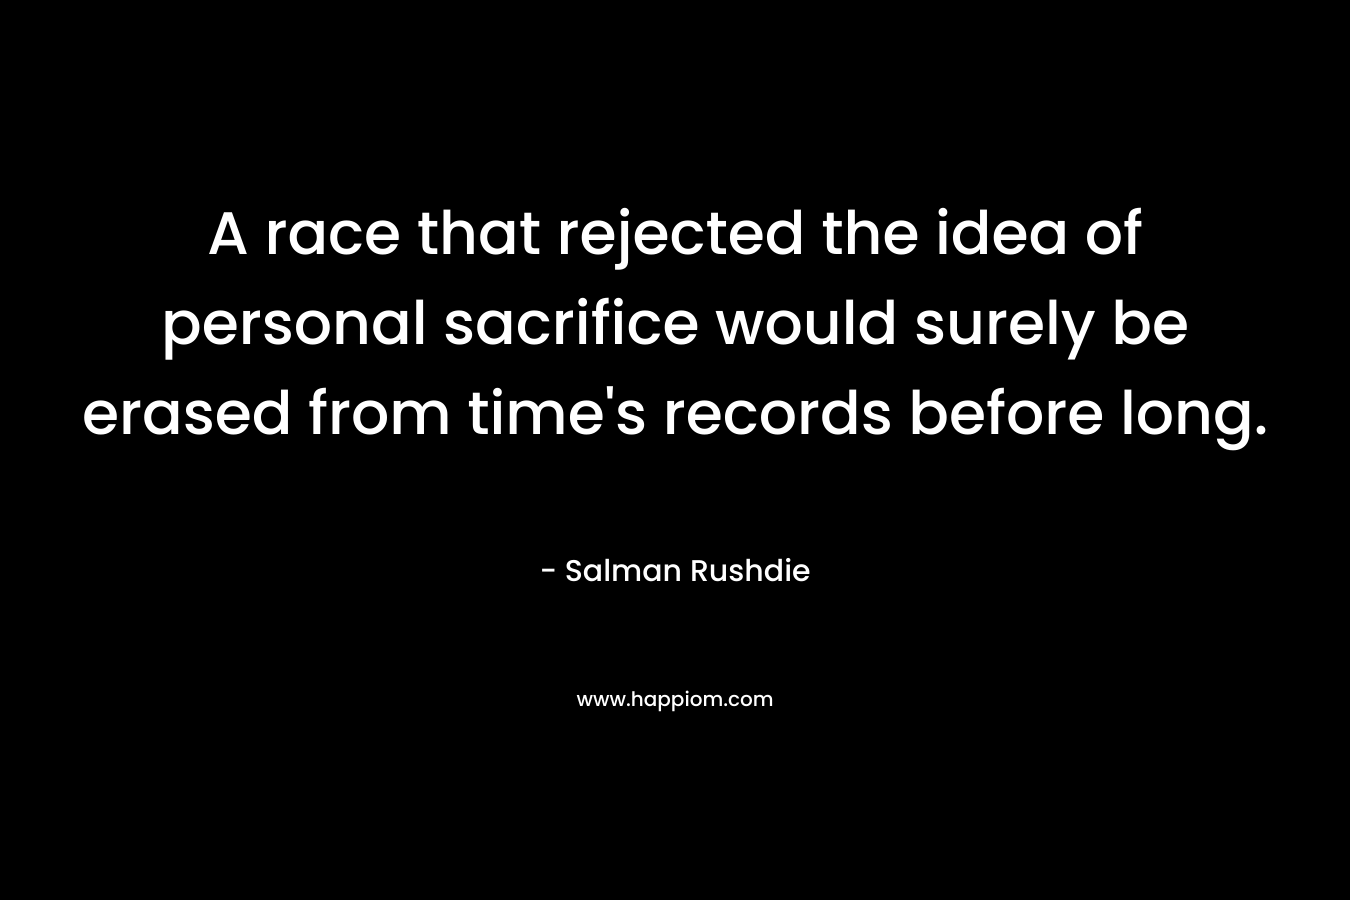 A race that rejected the idea of personal sacrifice would surely be erased from time's records before long.